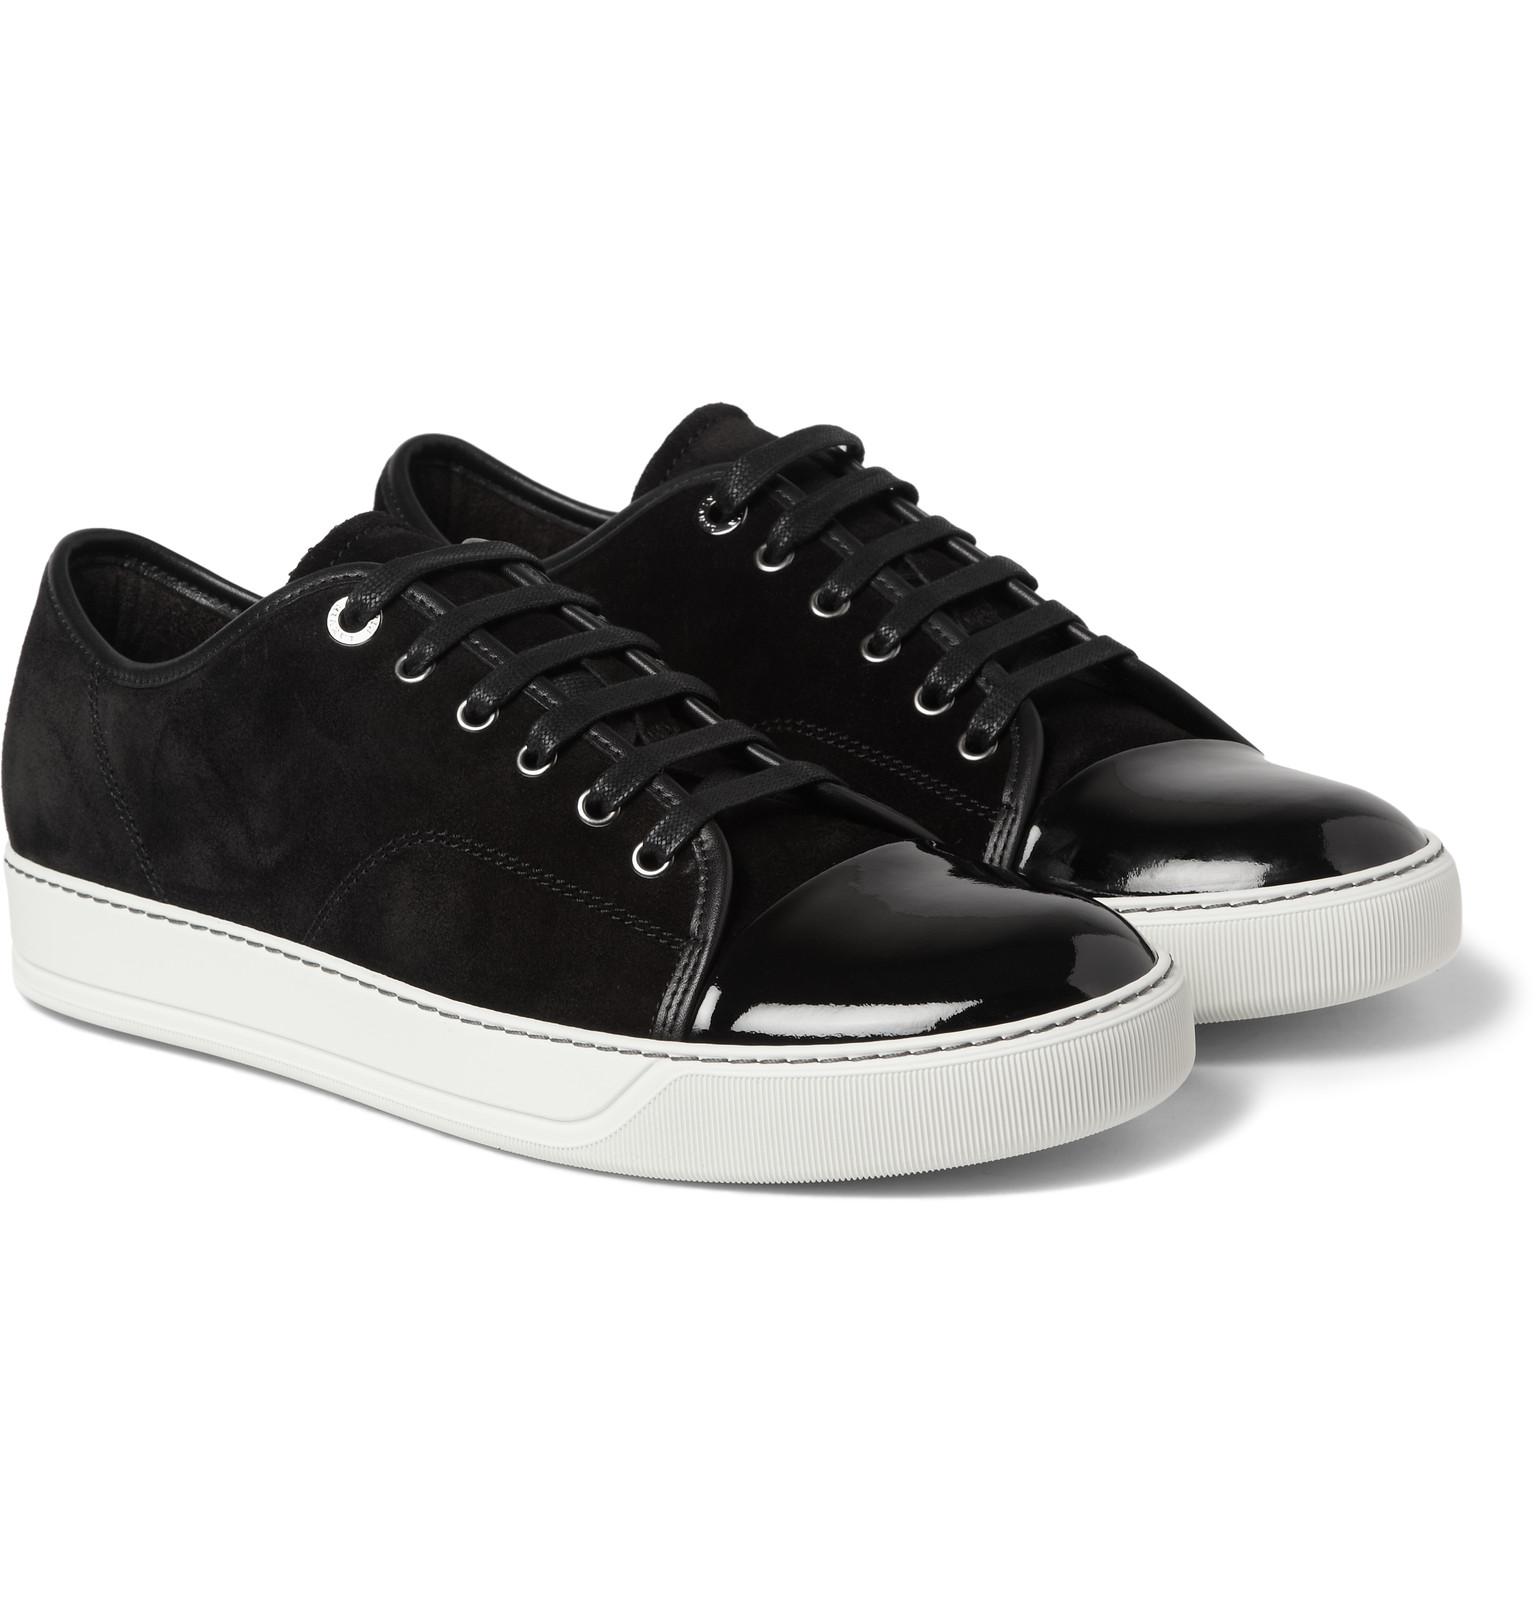 Lanvin Cap-toe Suede And Patent-leather Sneakers in Black for Men - Lyst